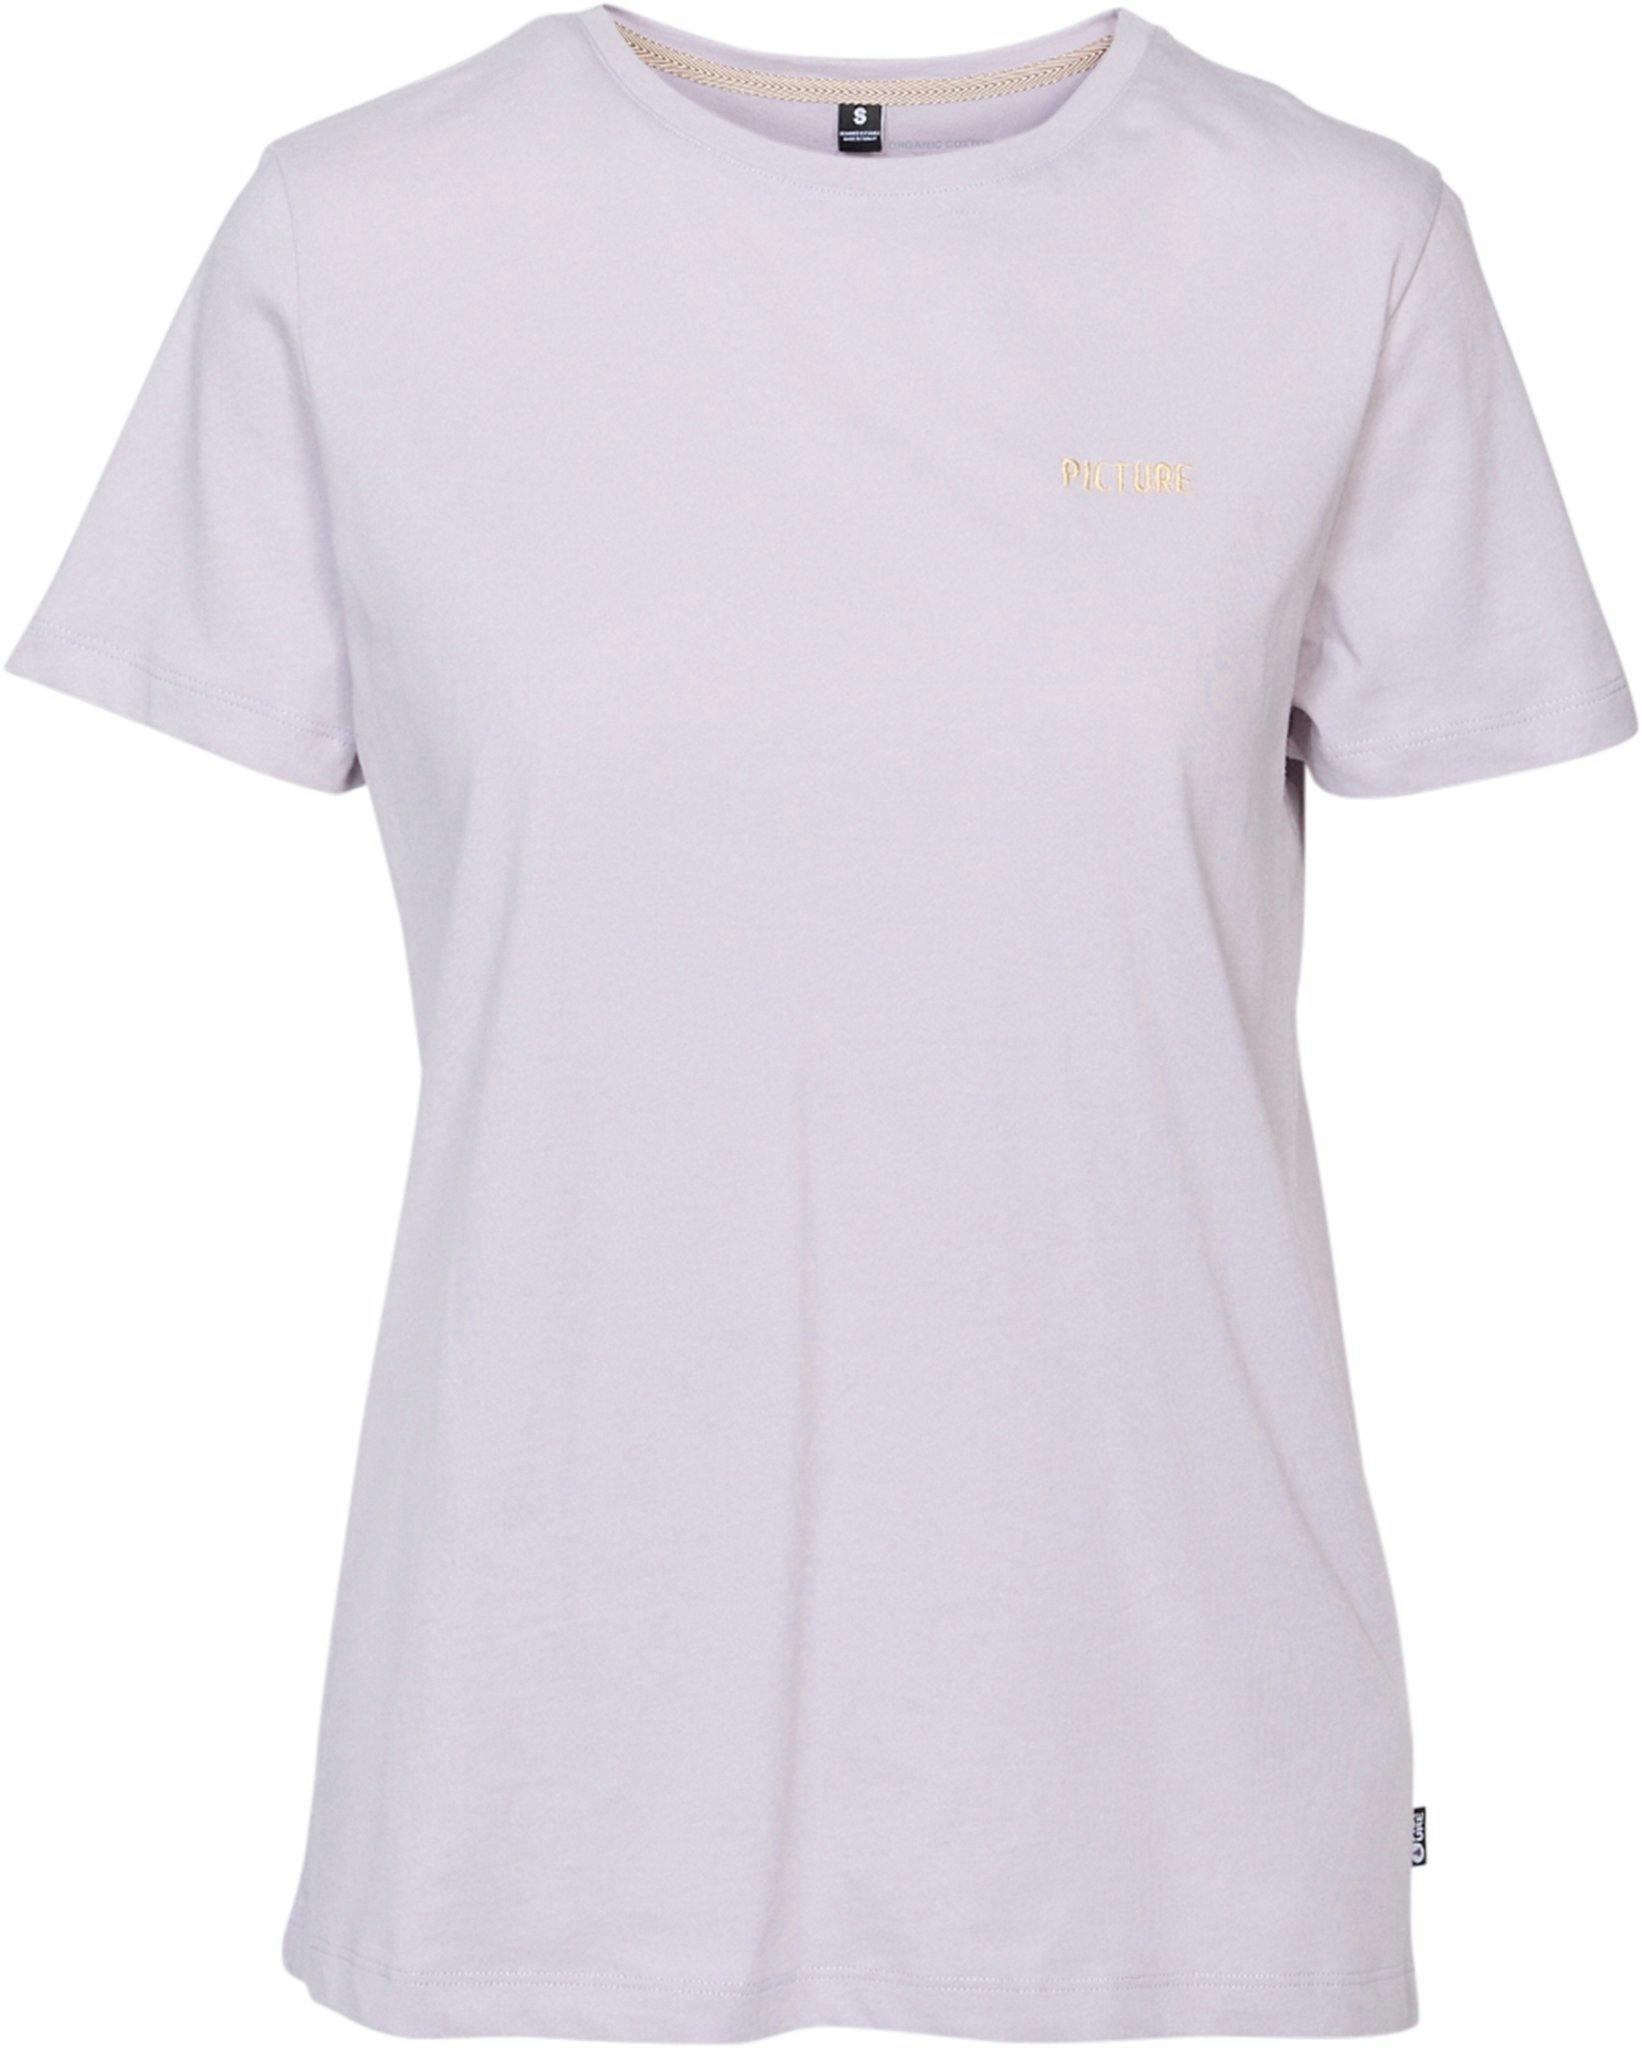 Product image for Key T-Shirt - Women's